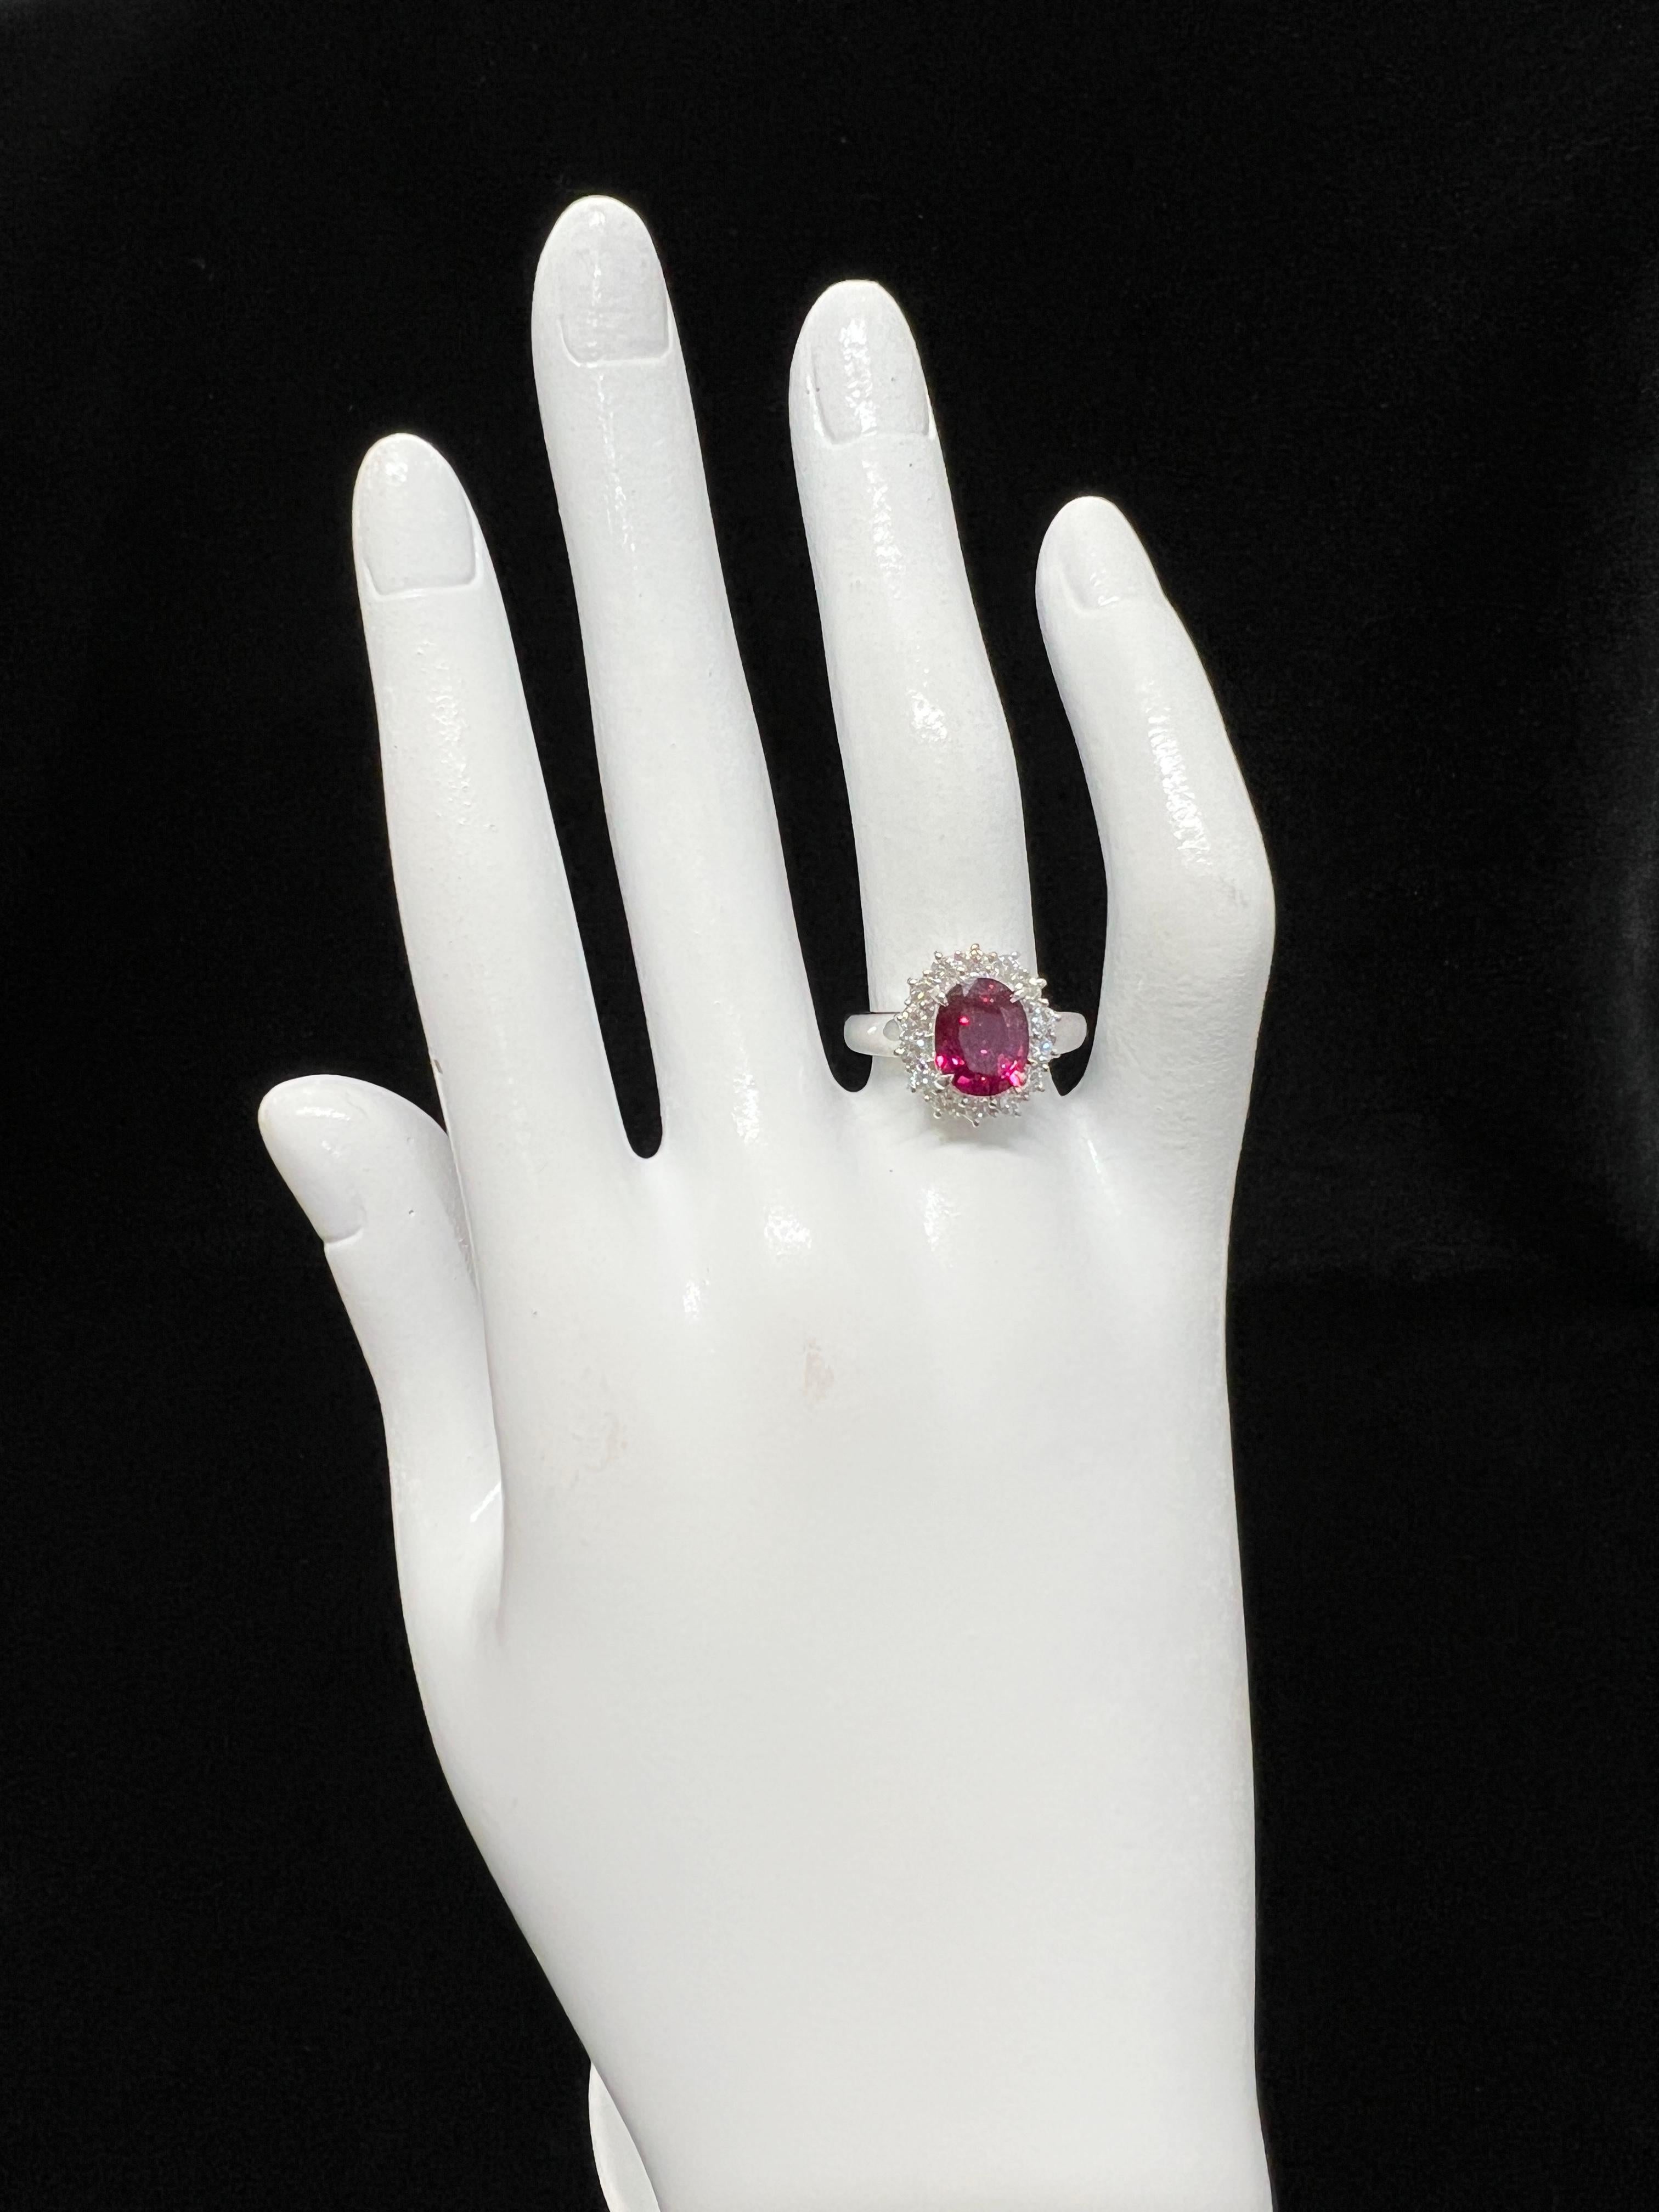 GIA Certified 2.17 Carat Unheated, African Ruby & Diamond Ring Set in Platinum For Sale 1